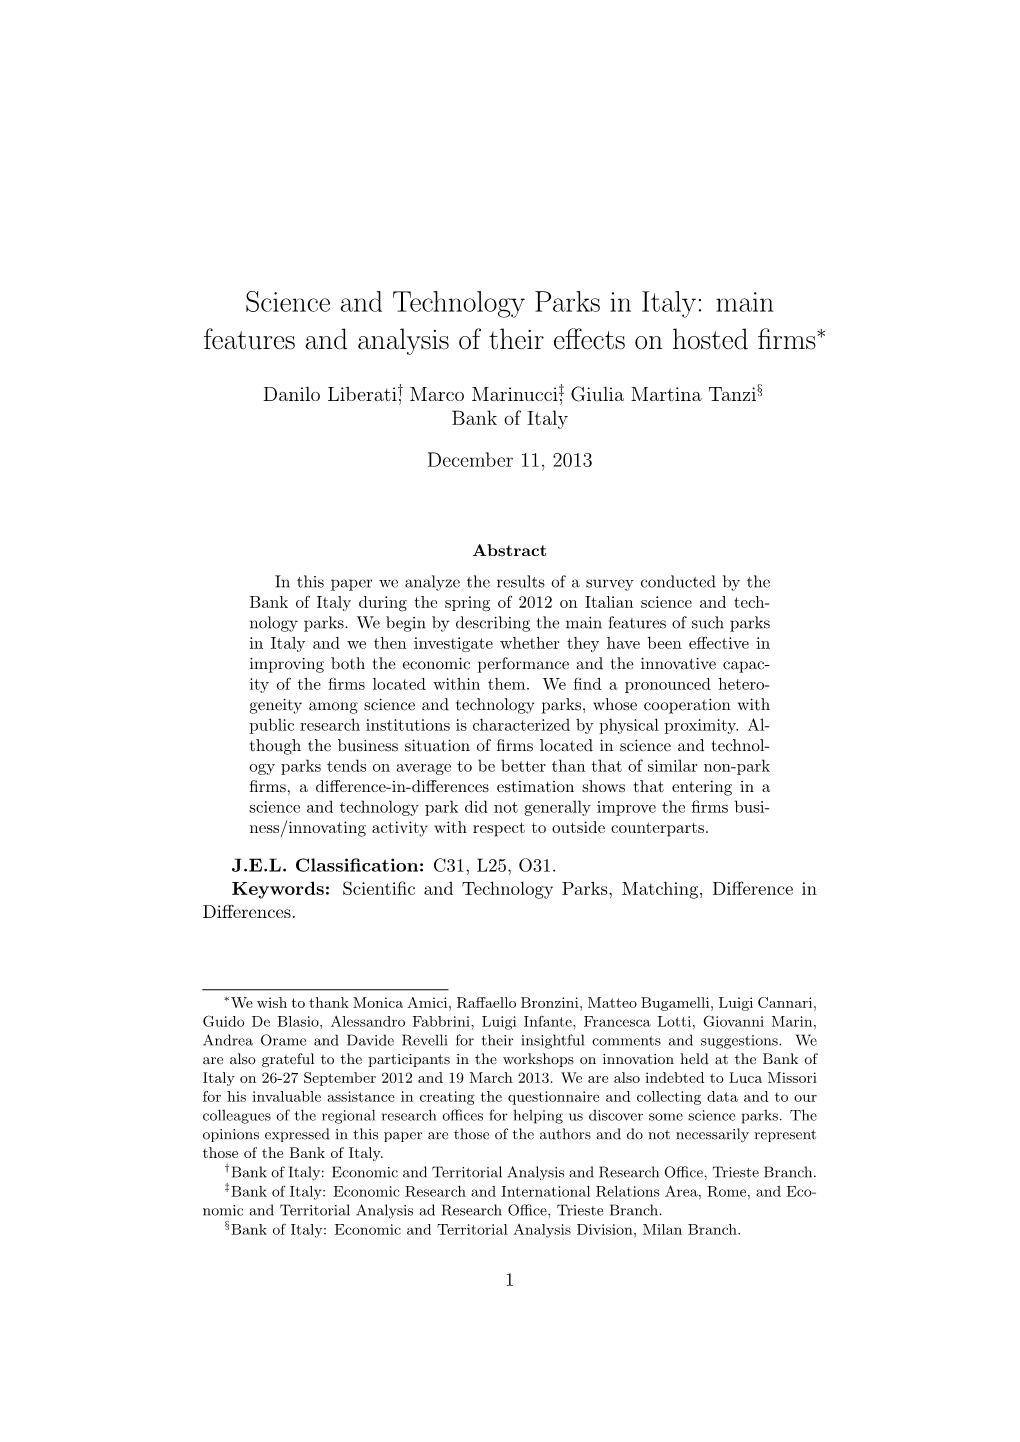 Science and Technology Parks in Italy: Main Features and Analysis of Their Eﬀects on Hosted ﬁrms∗